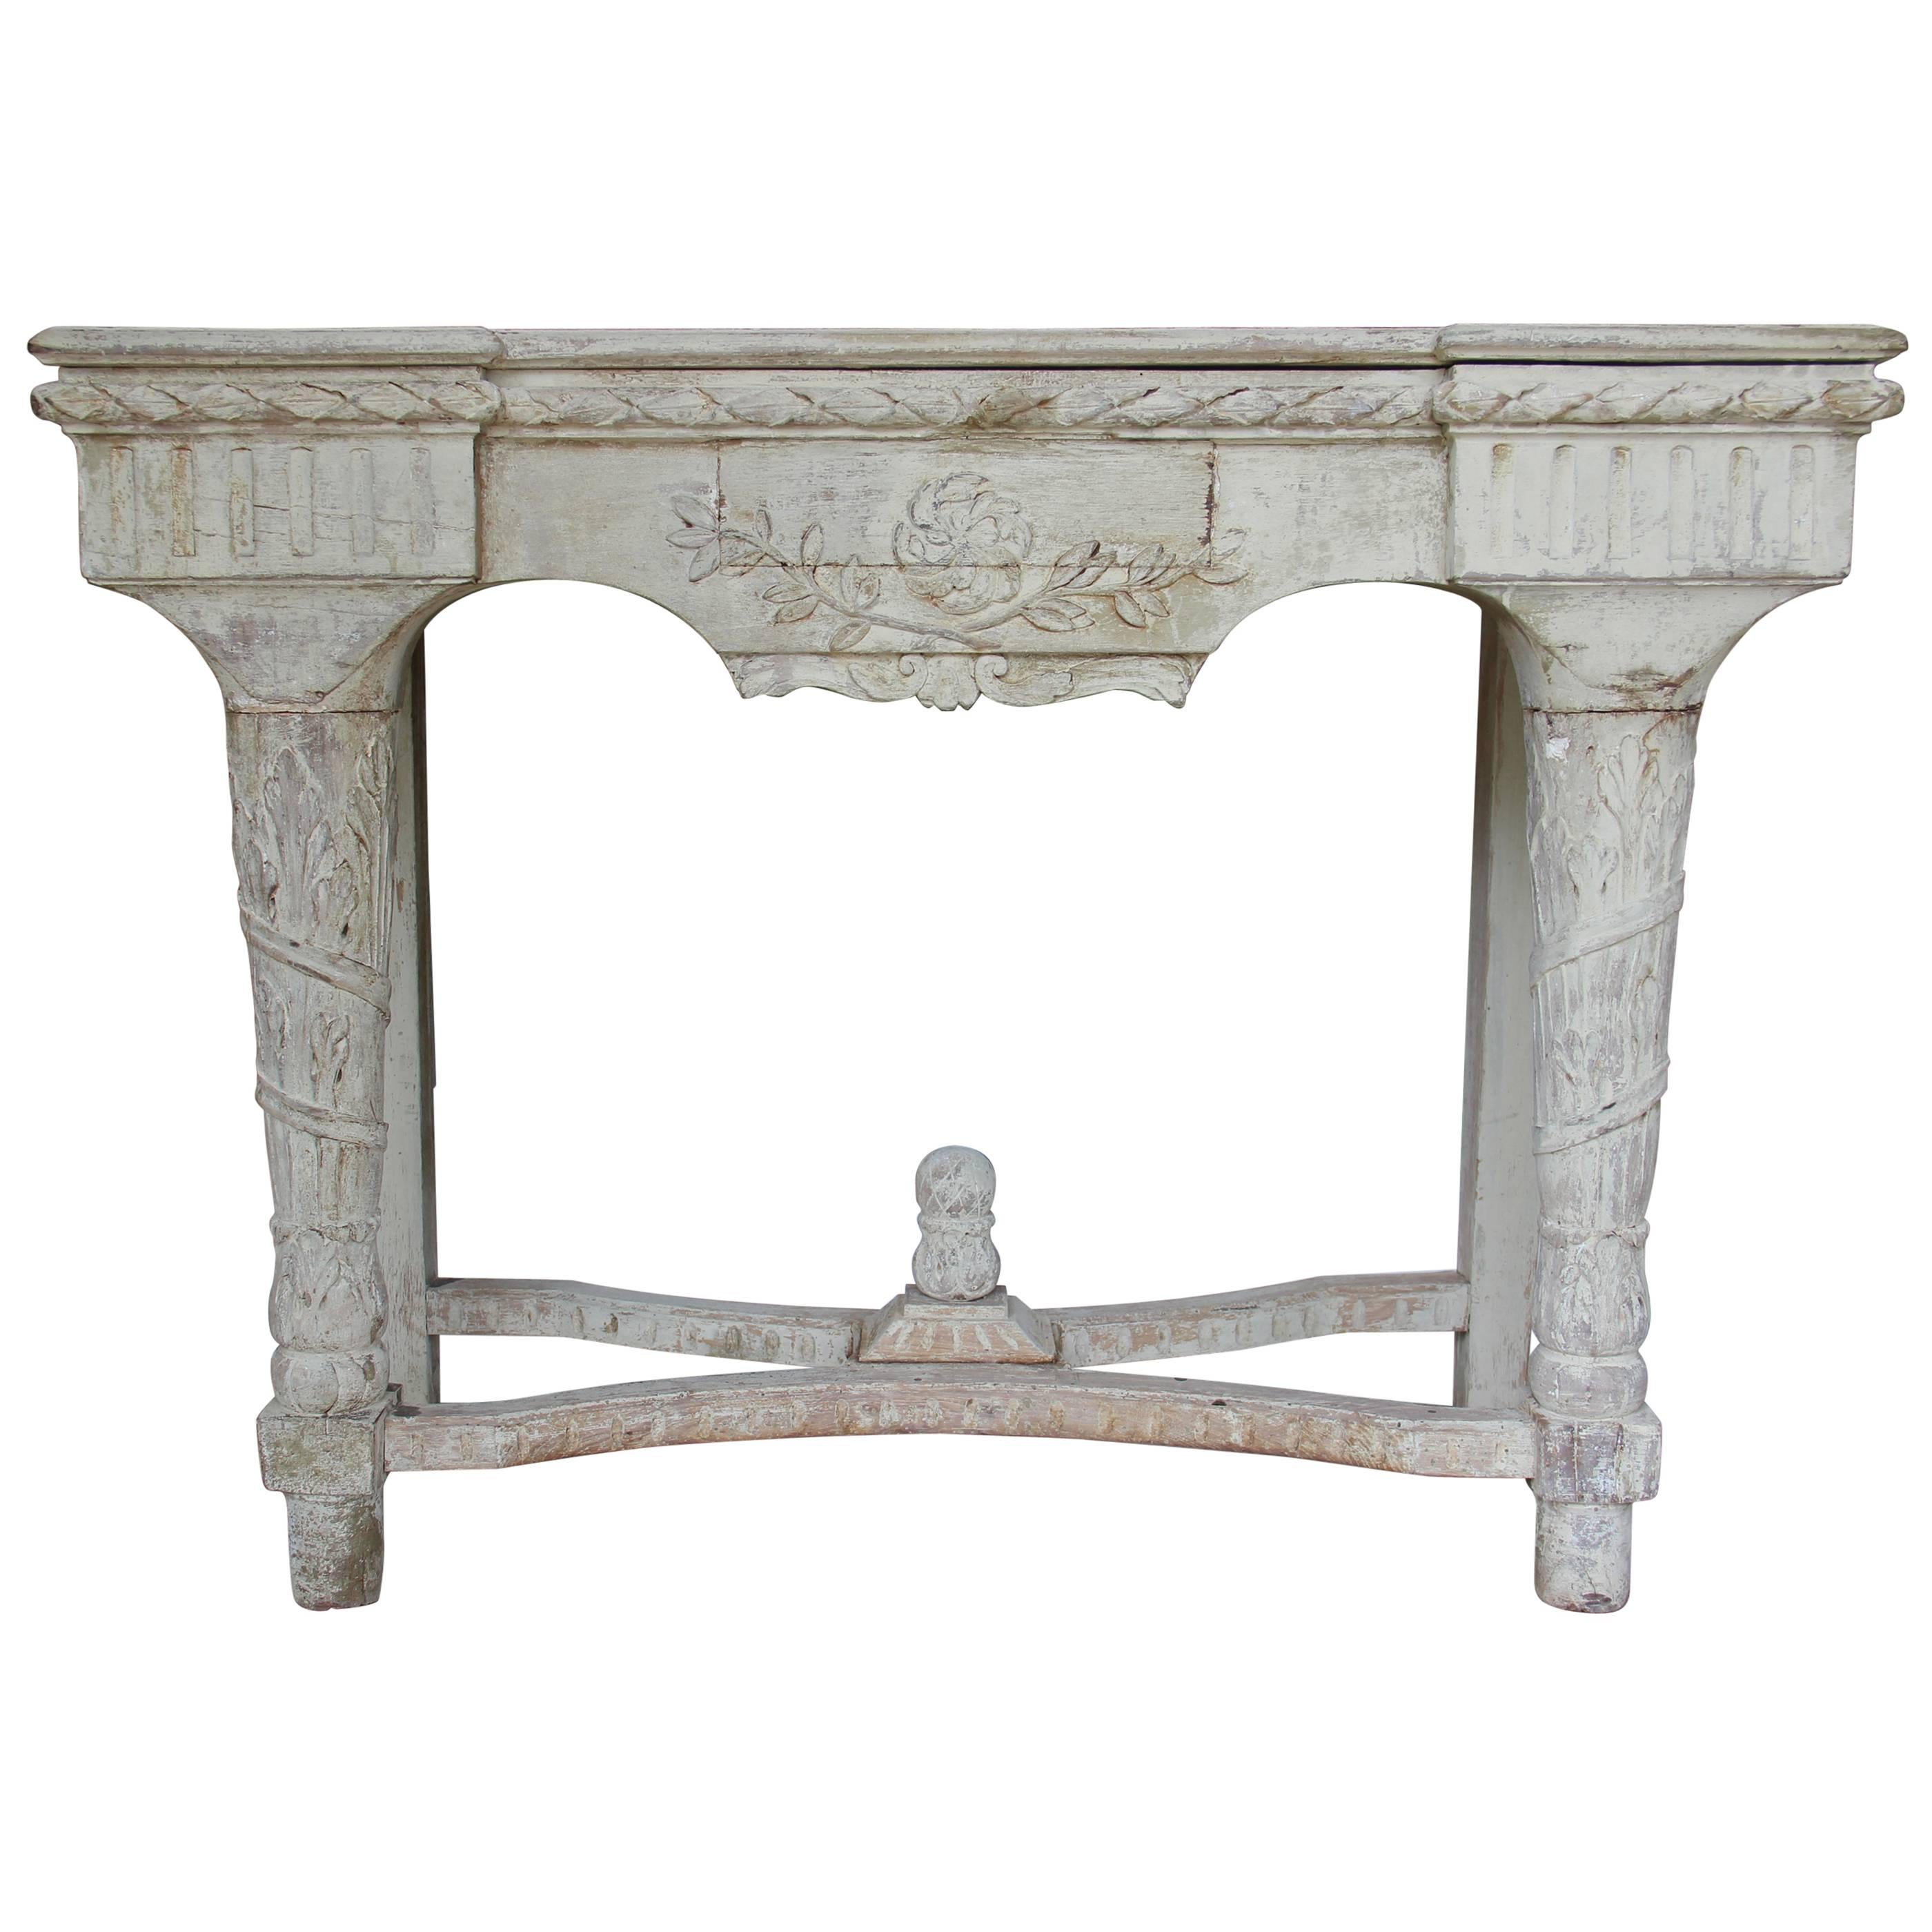 French Antique Carved Console Table in Original Paint, 19th Century, Louis XVI